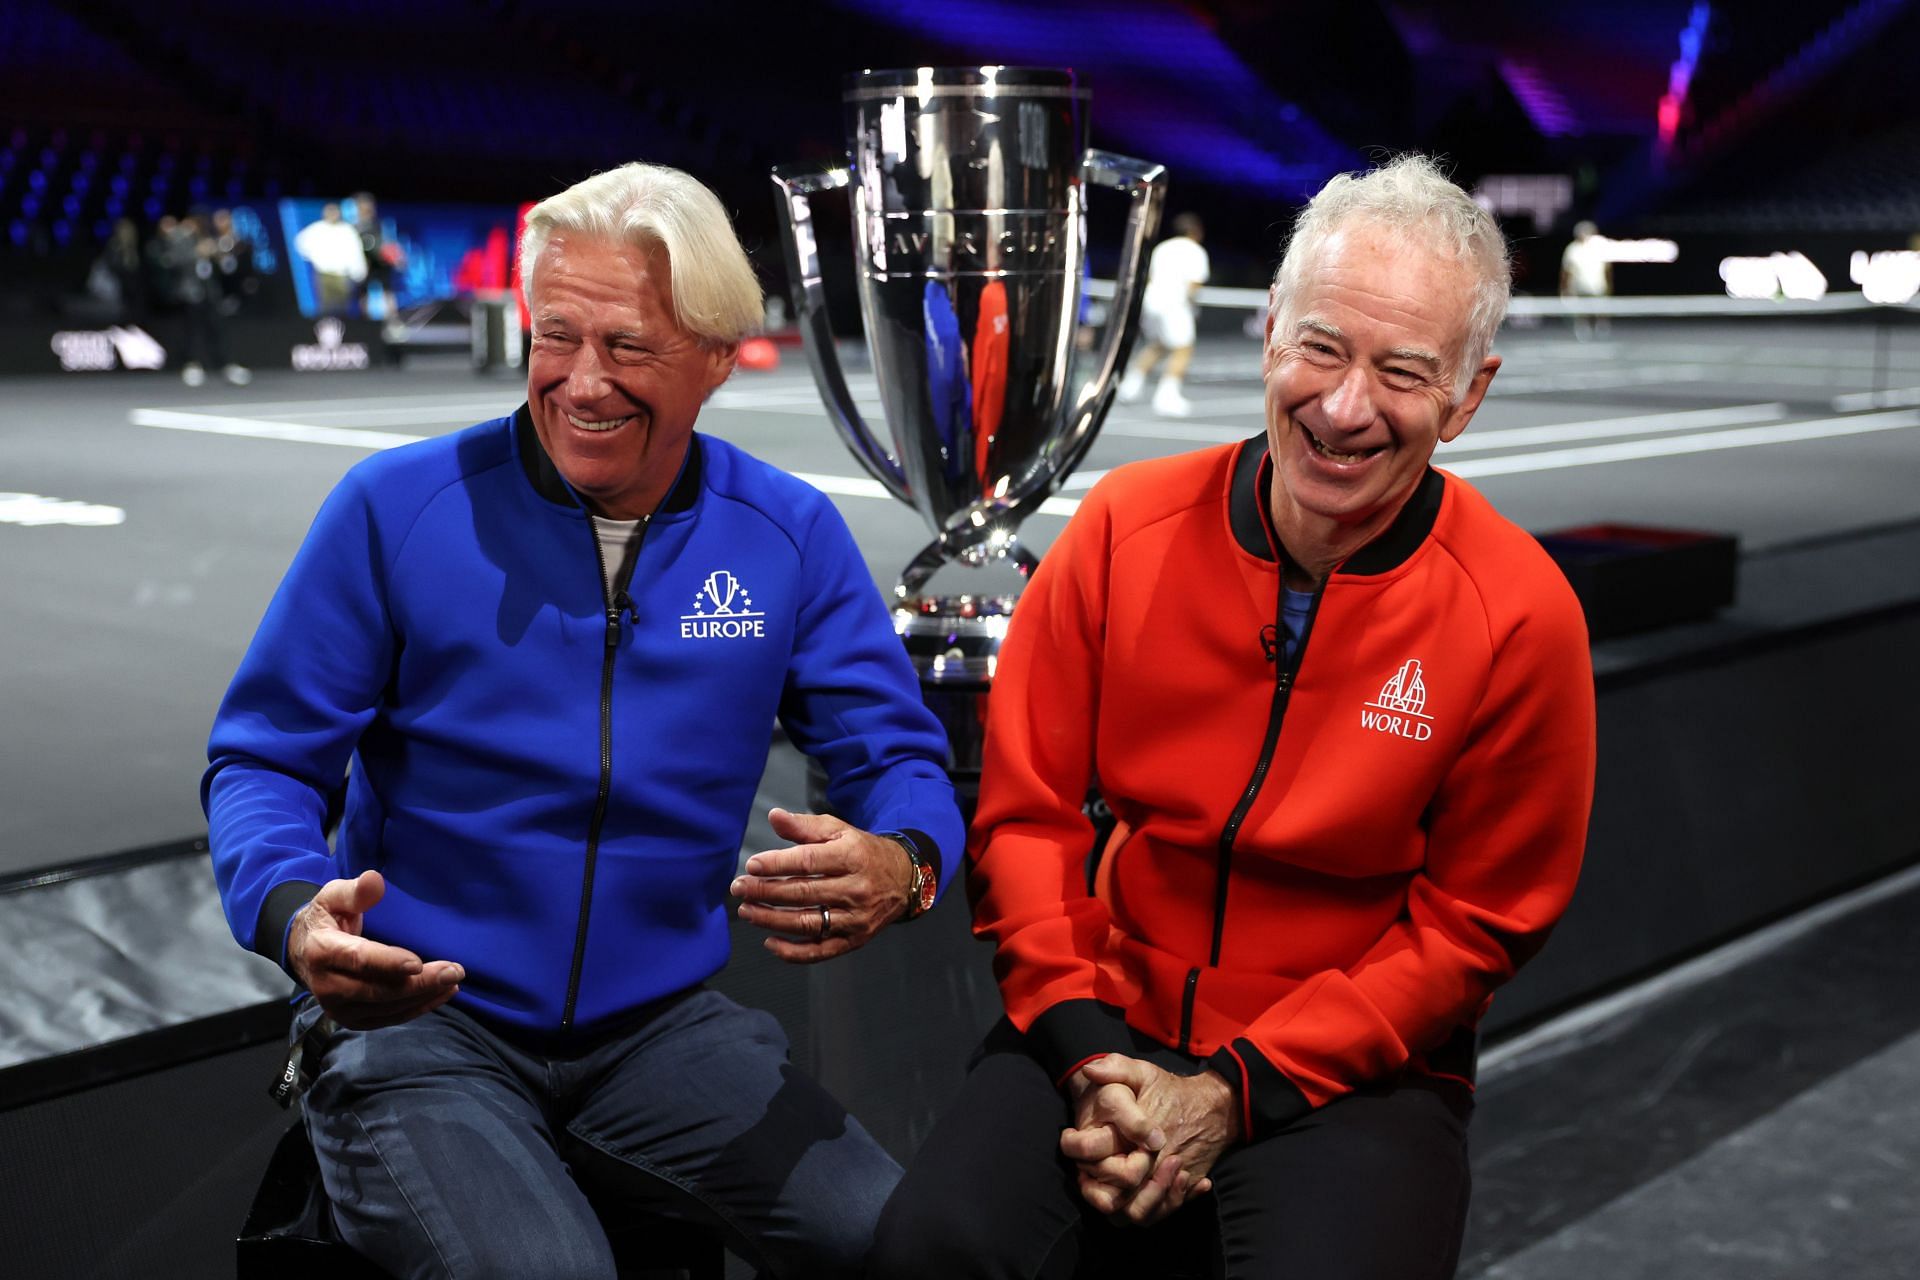 Bjorn Borg and John McEnroe at the 2022 Laver Cup